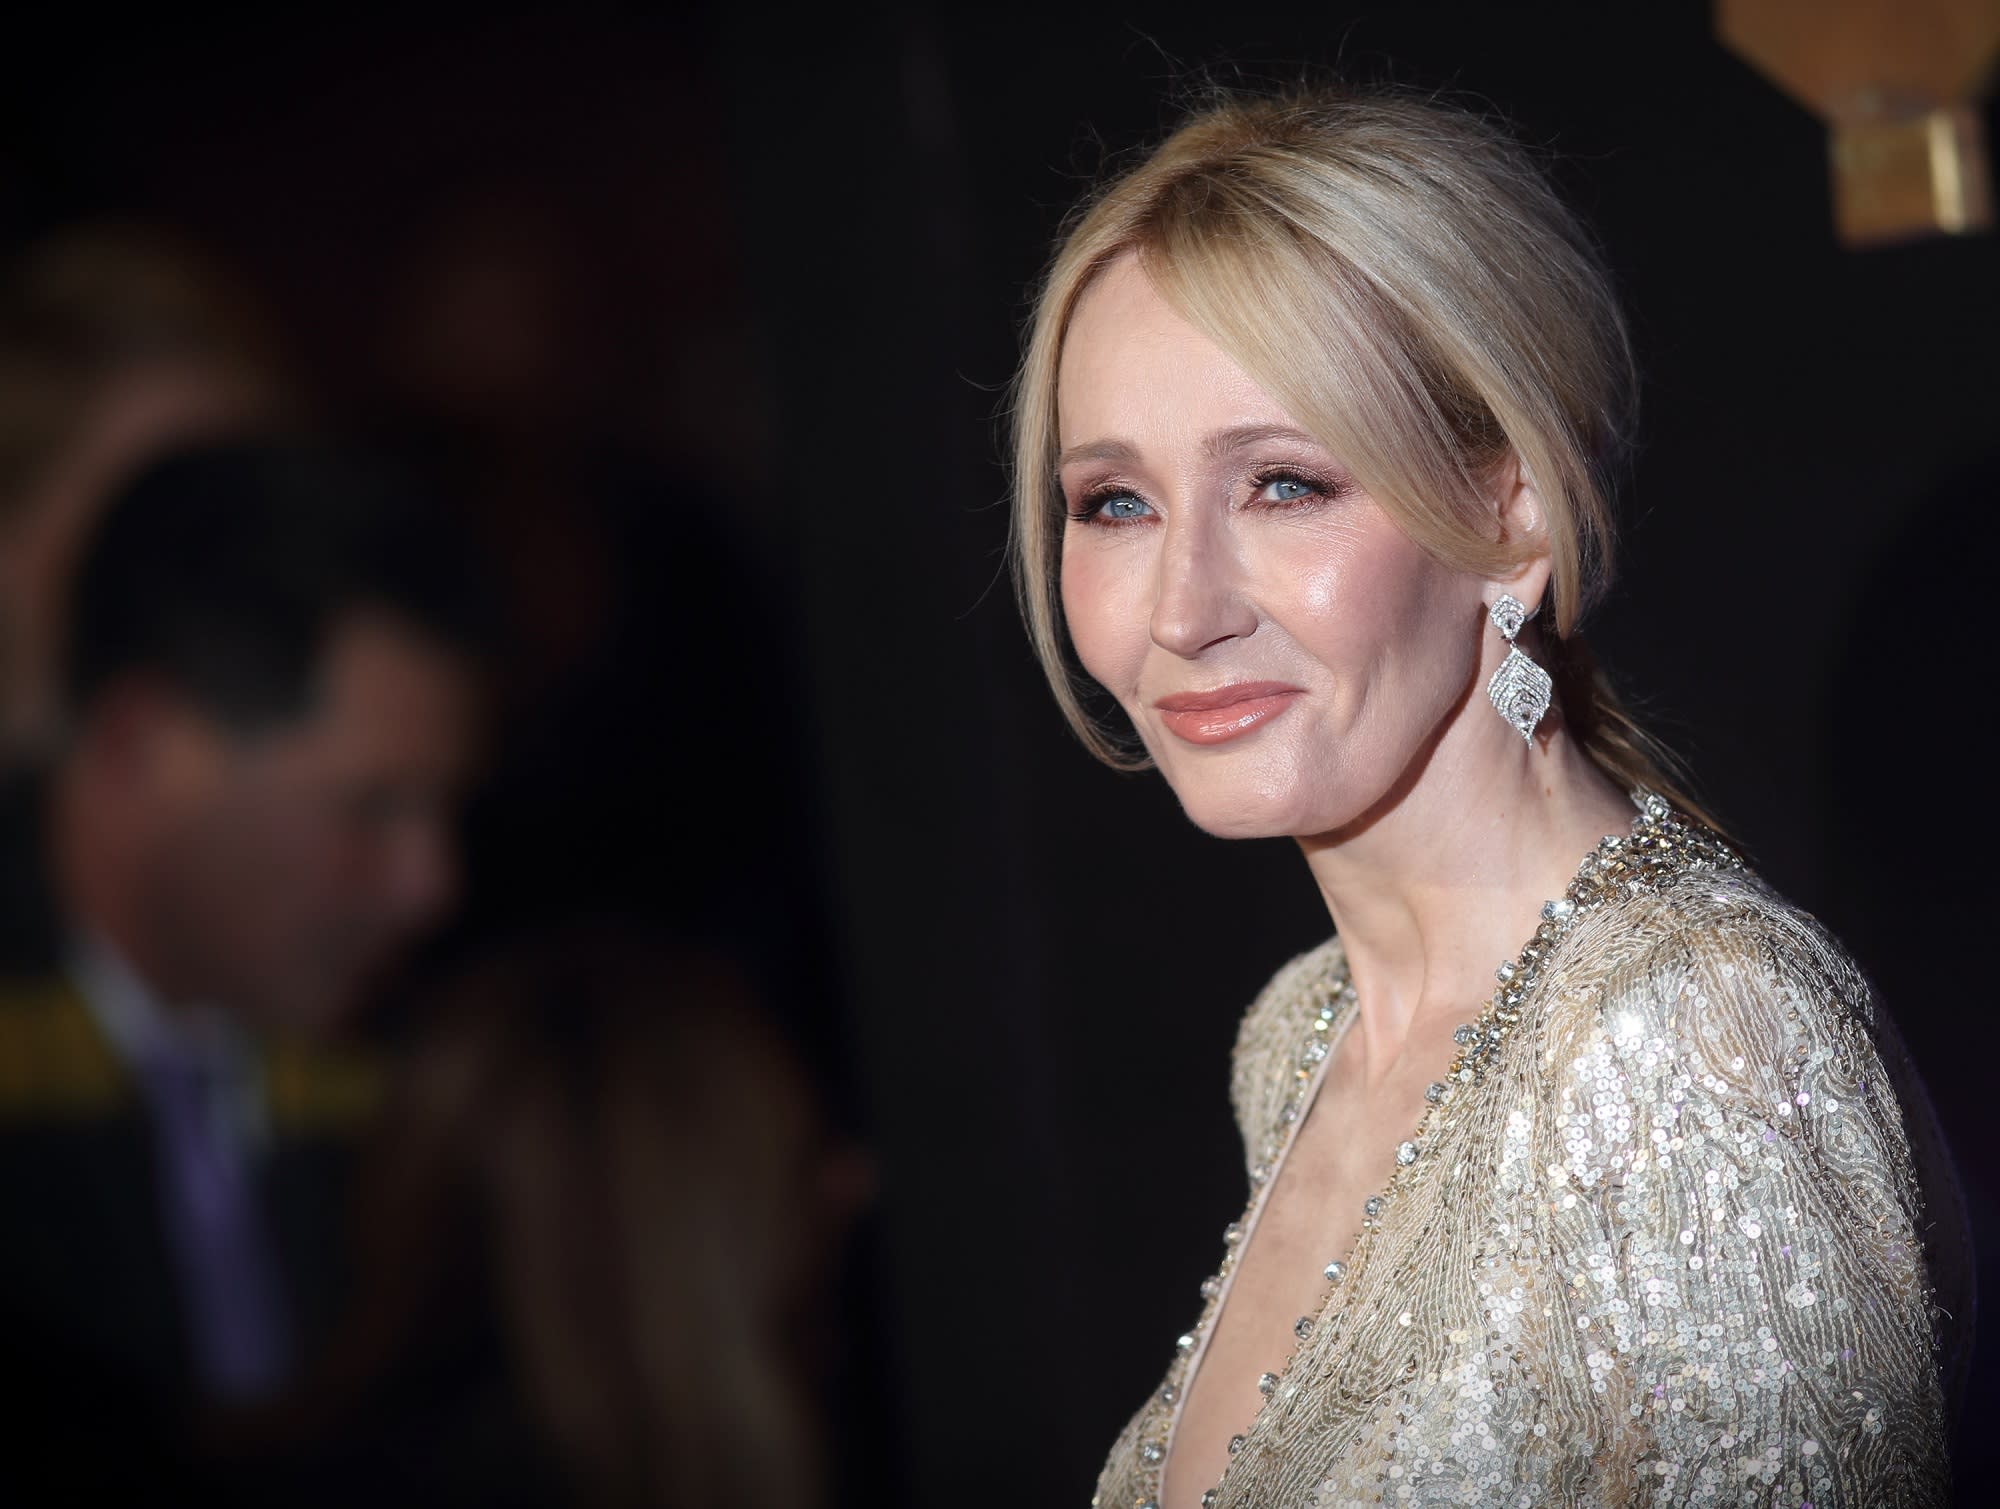 Harry Potter author J.K. Rowling reveals writing routine on Twitter